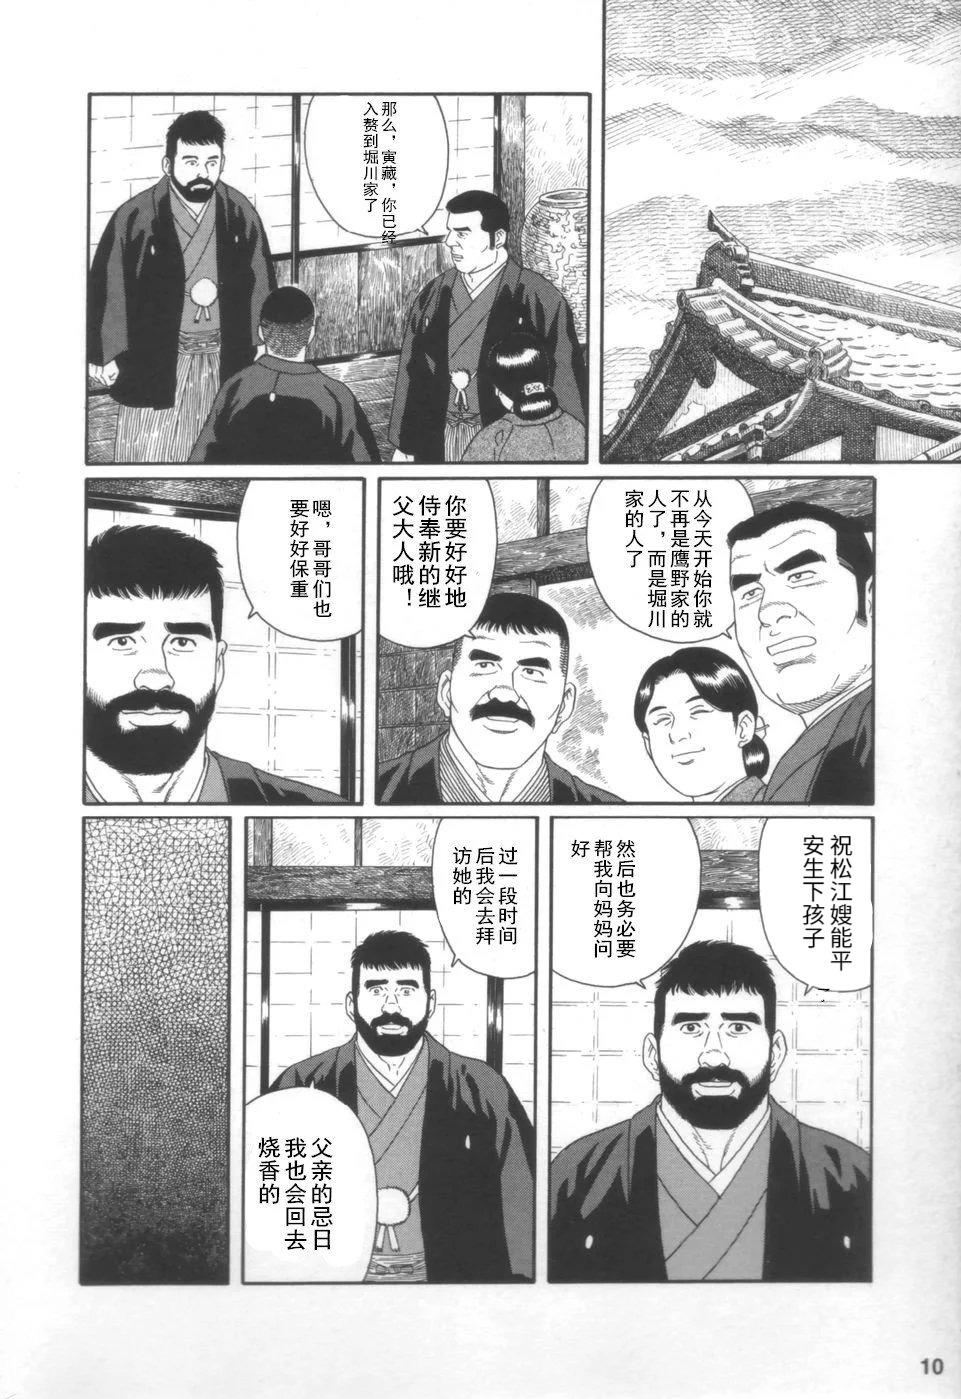 Classic Gedou no Ie Joukan | 邪道之家 Vol. 1 Ch.1 Missionary Porn - Page 9